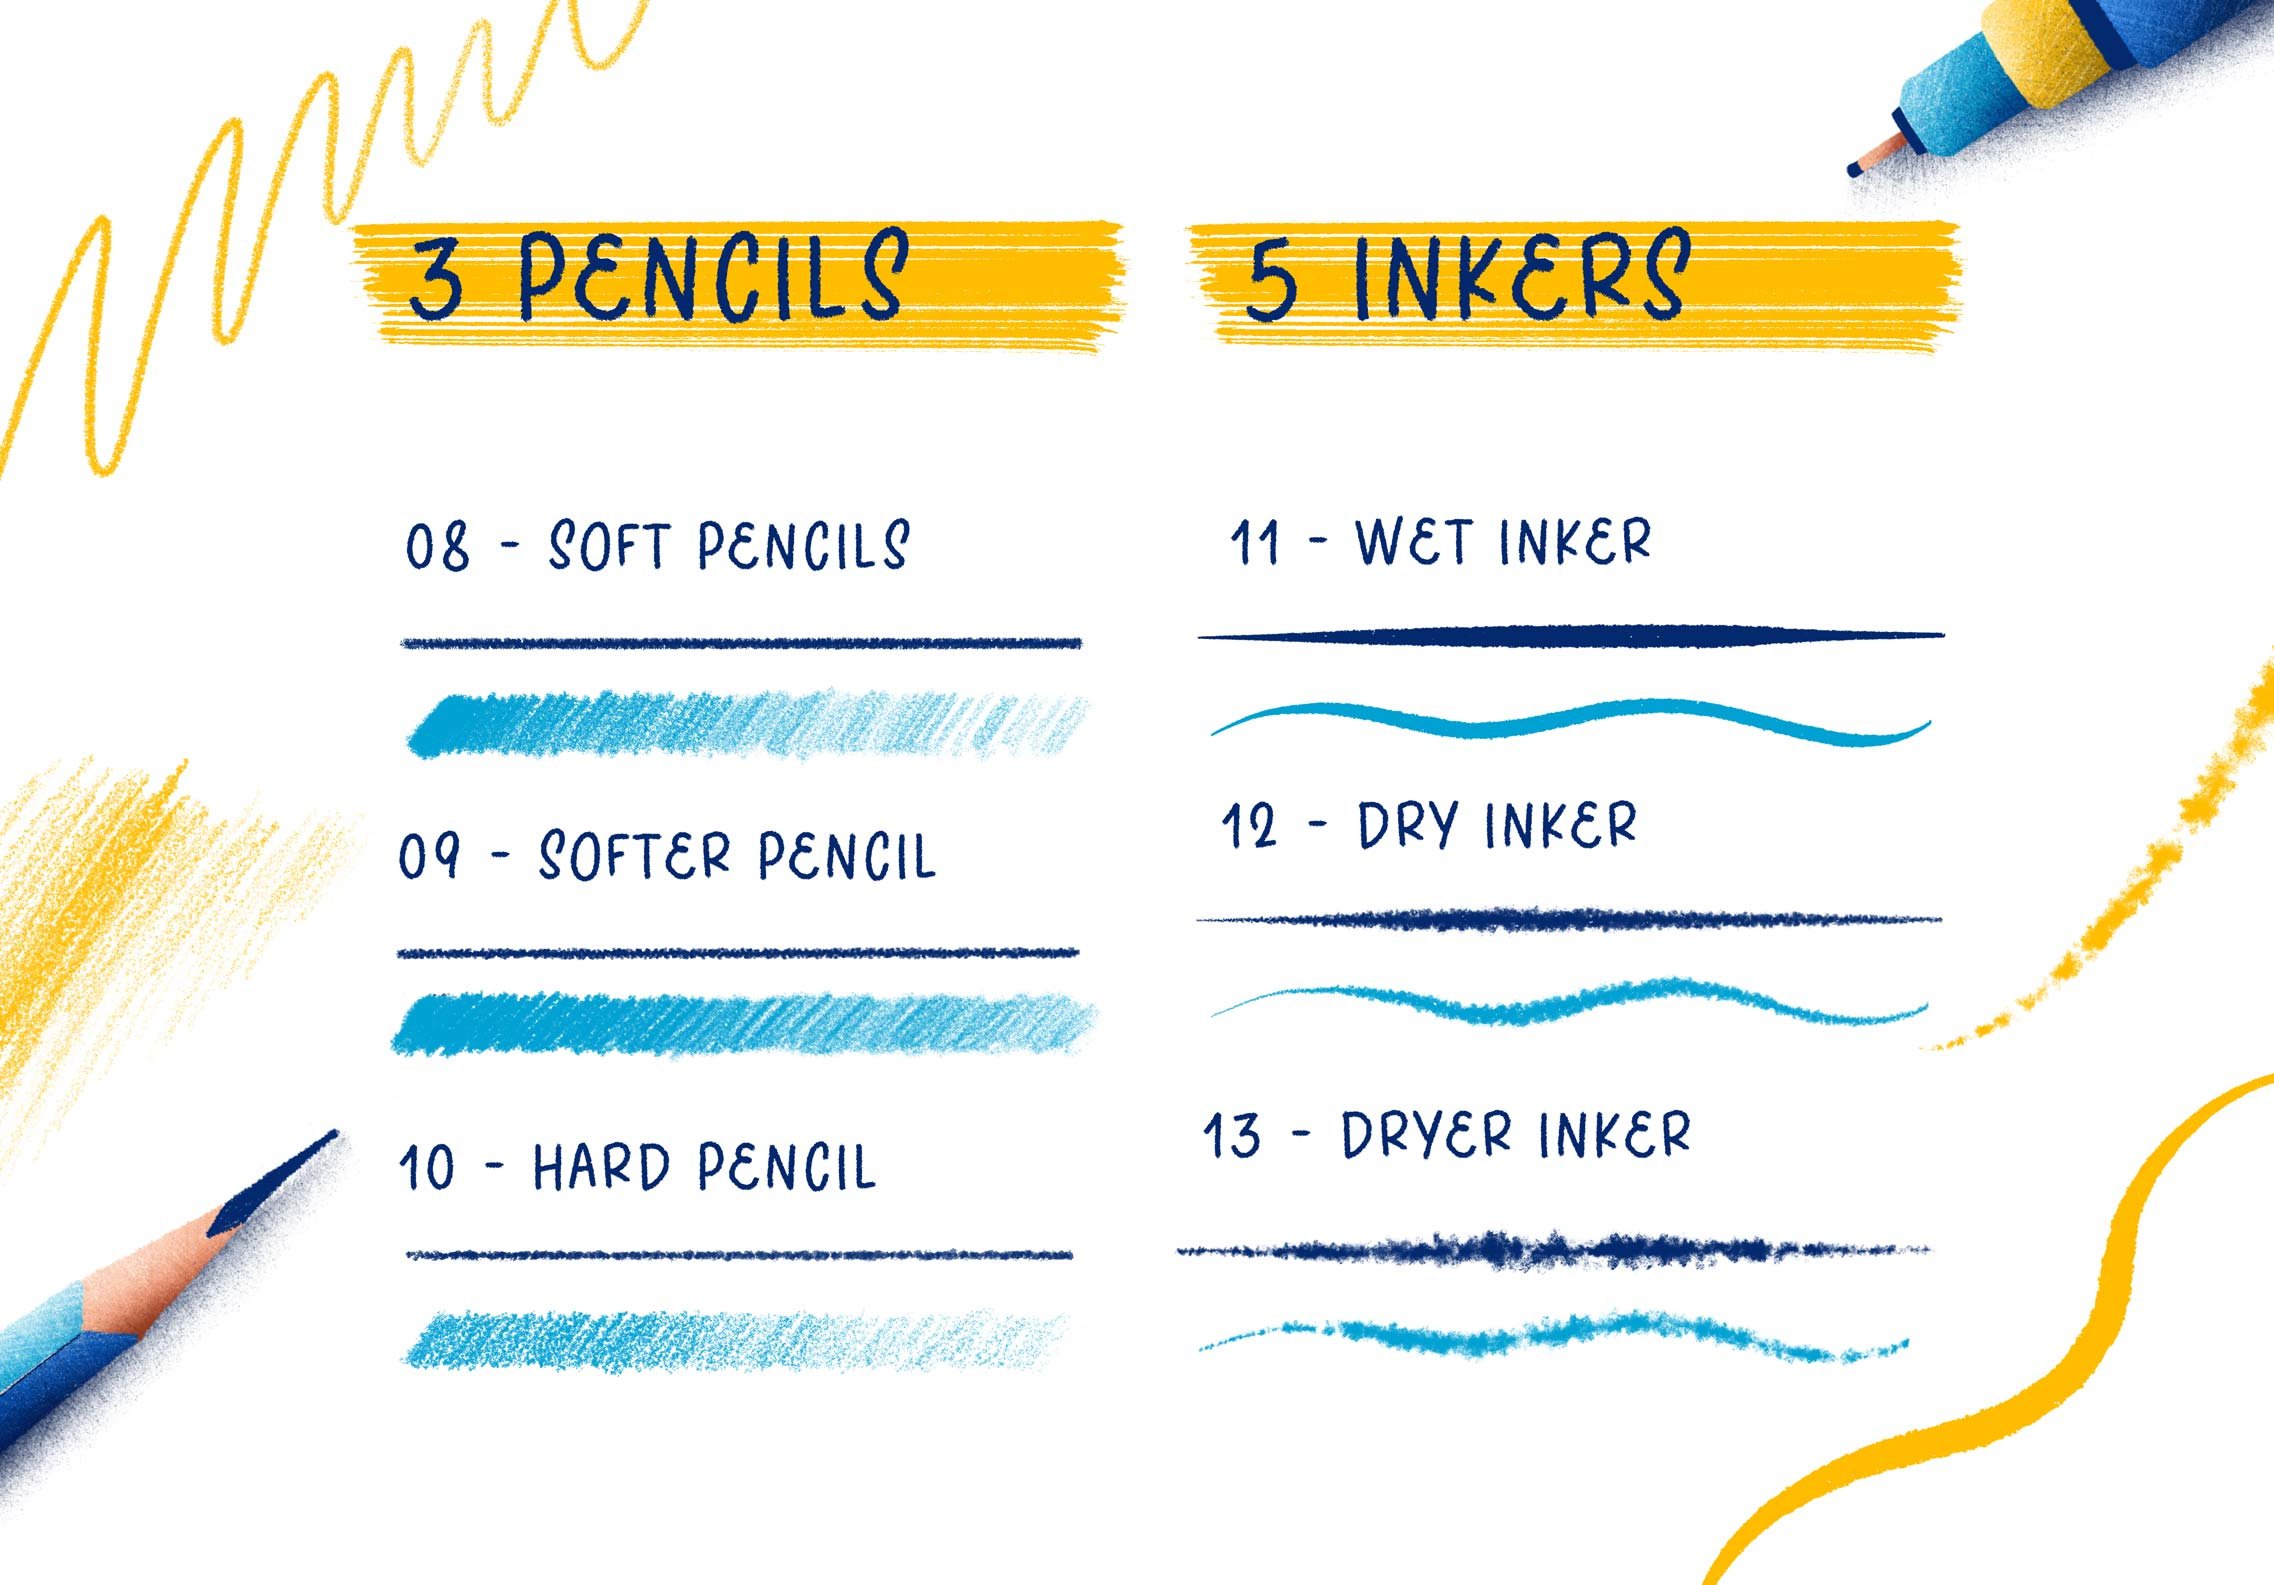 There are 3 pencils and 5 inkers.